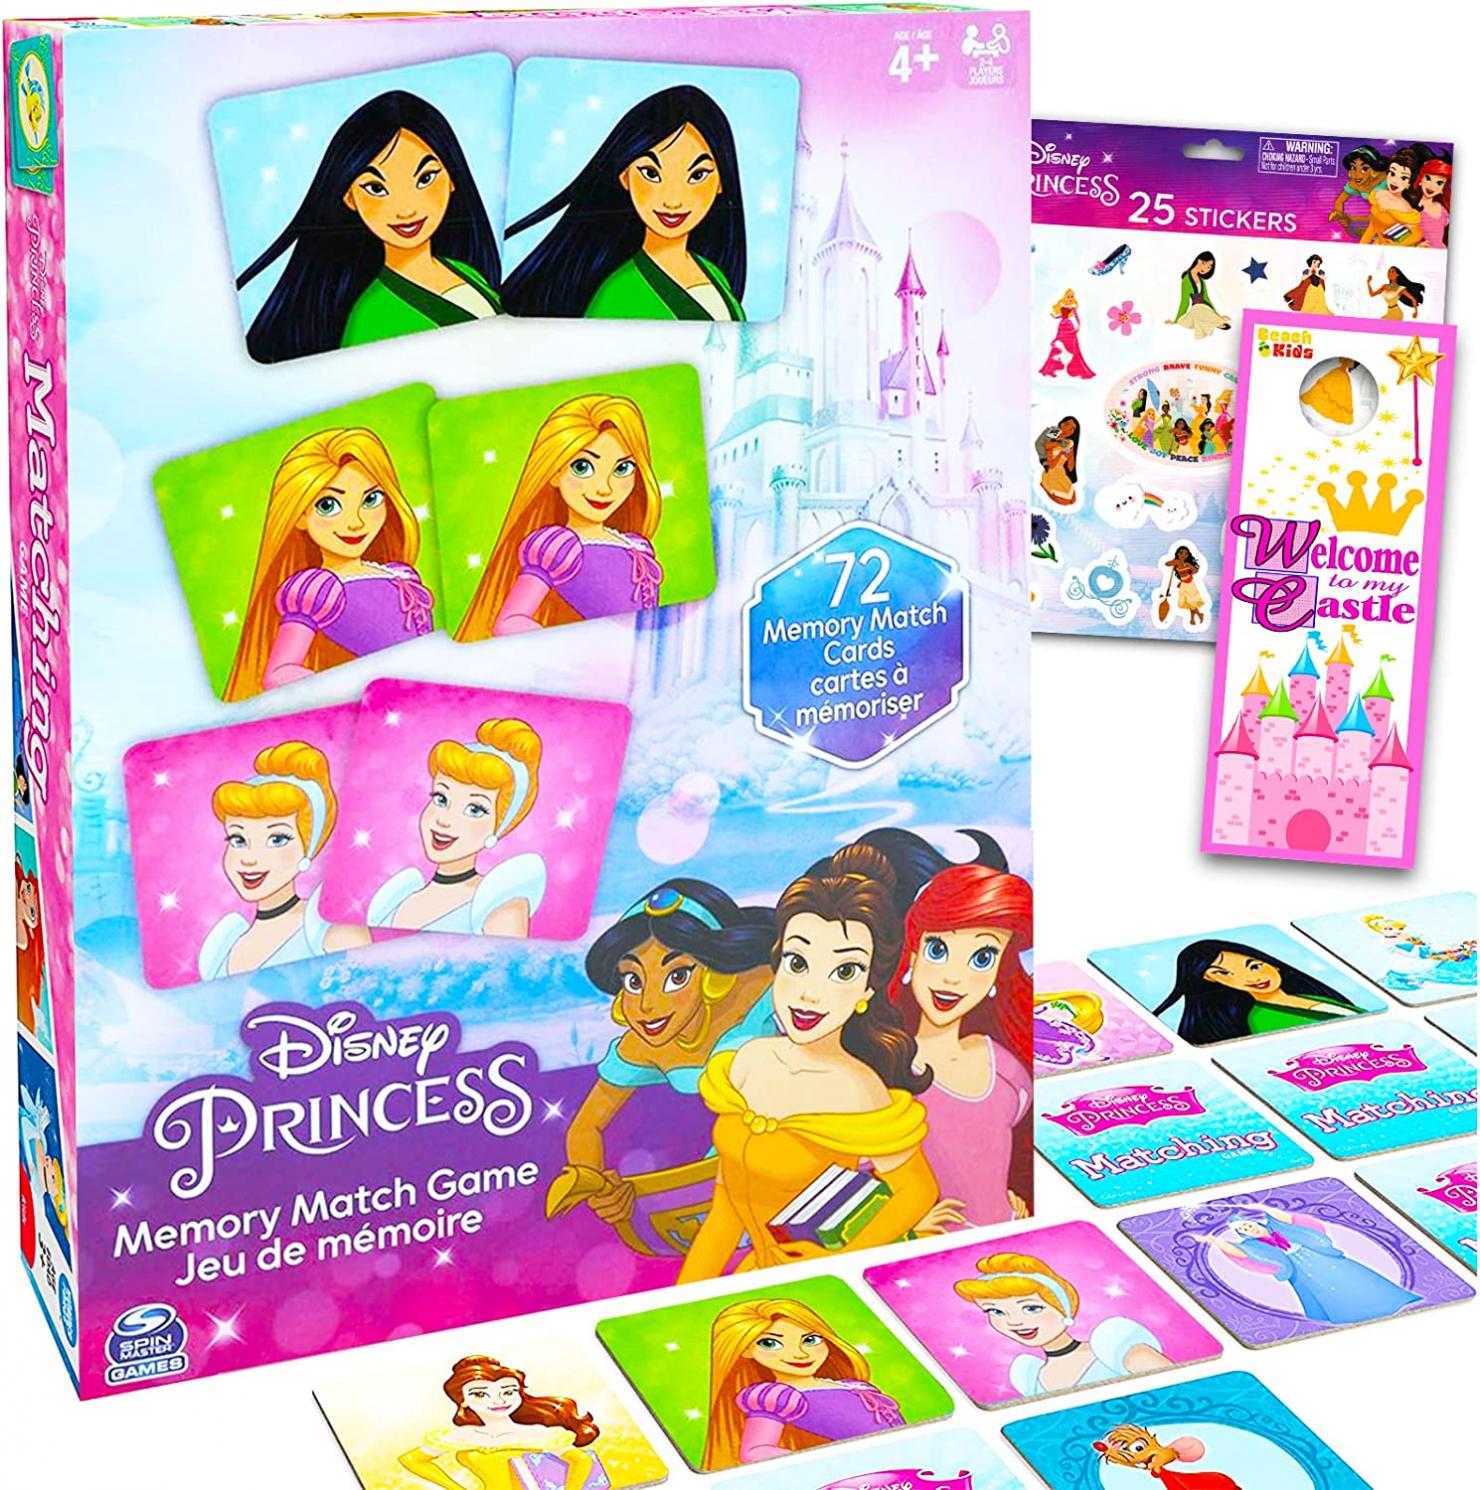 Disney Princess Educational Toy Bundle Disney Princess Memory Game Set - Disney Princess Matching Game with Disney Stickers and More (Disney Learning Toy)